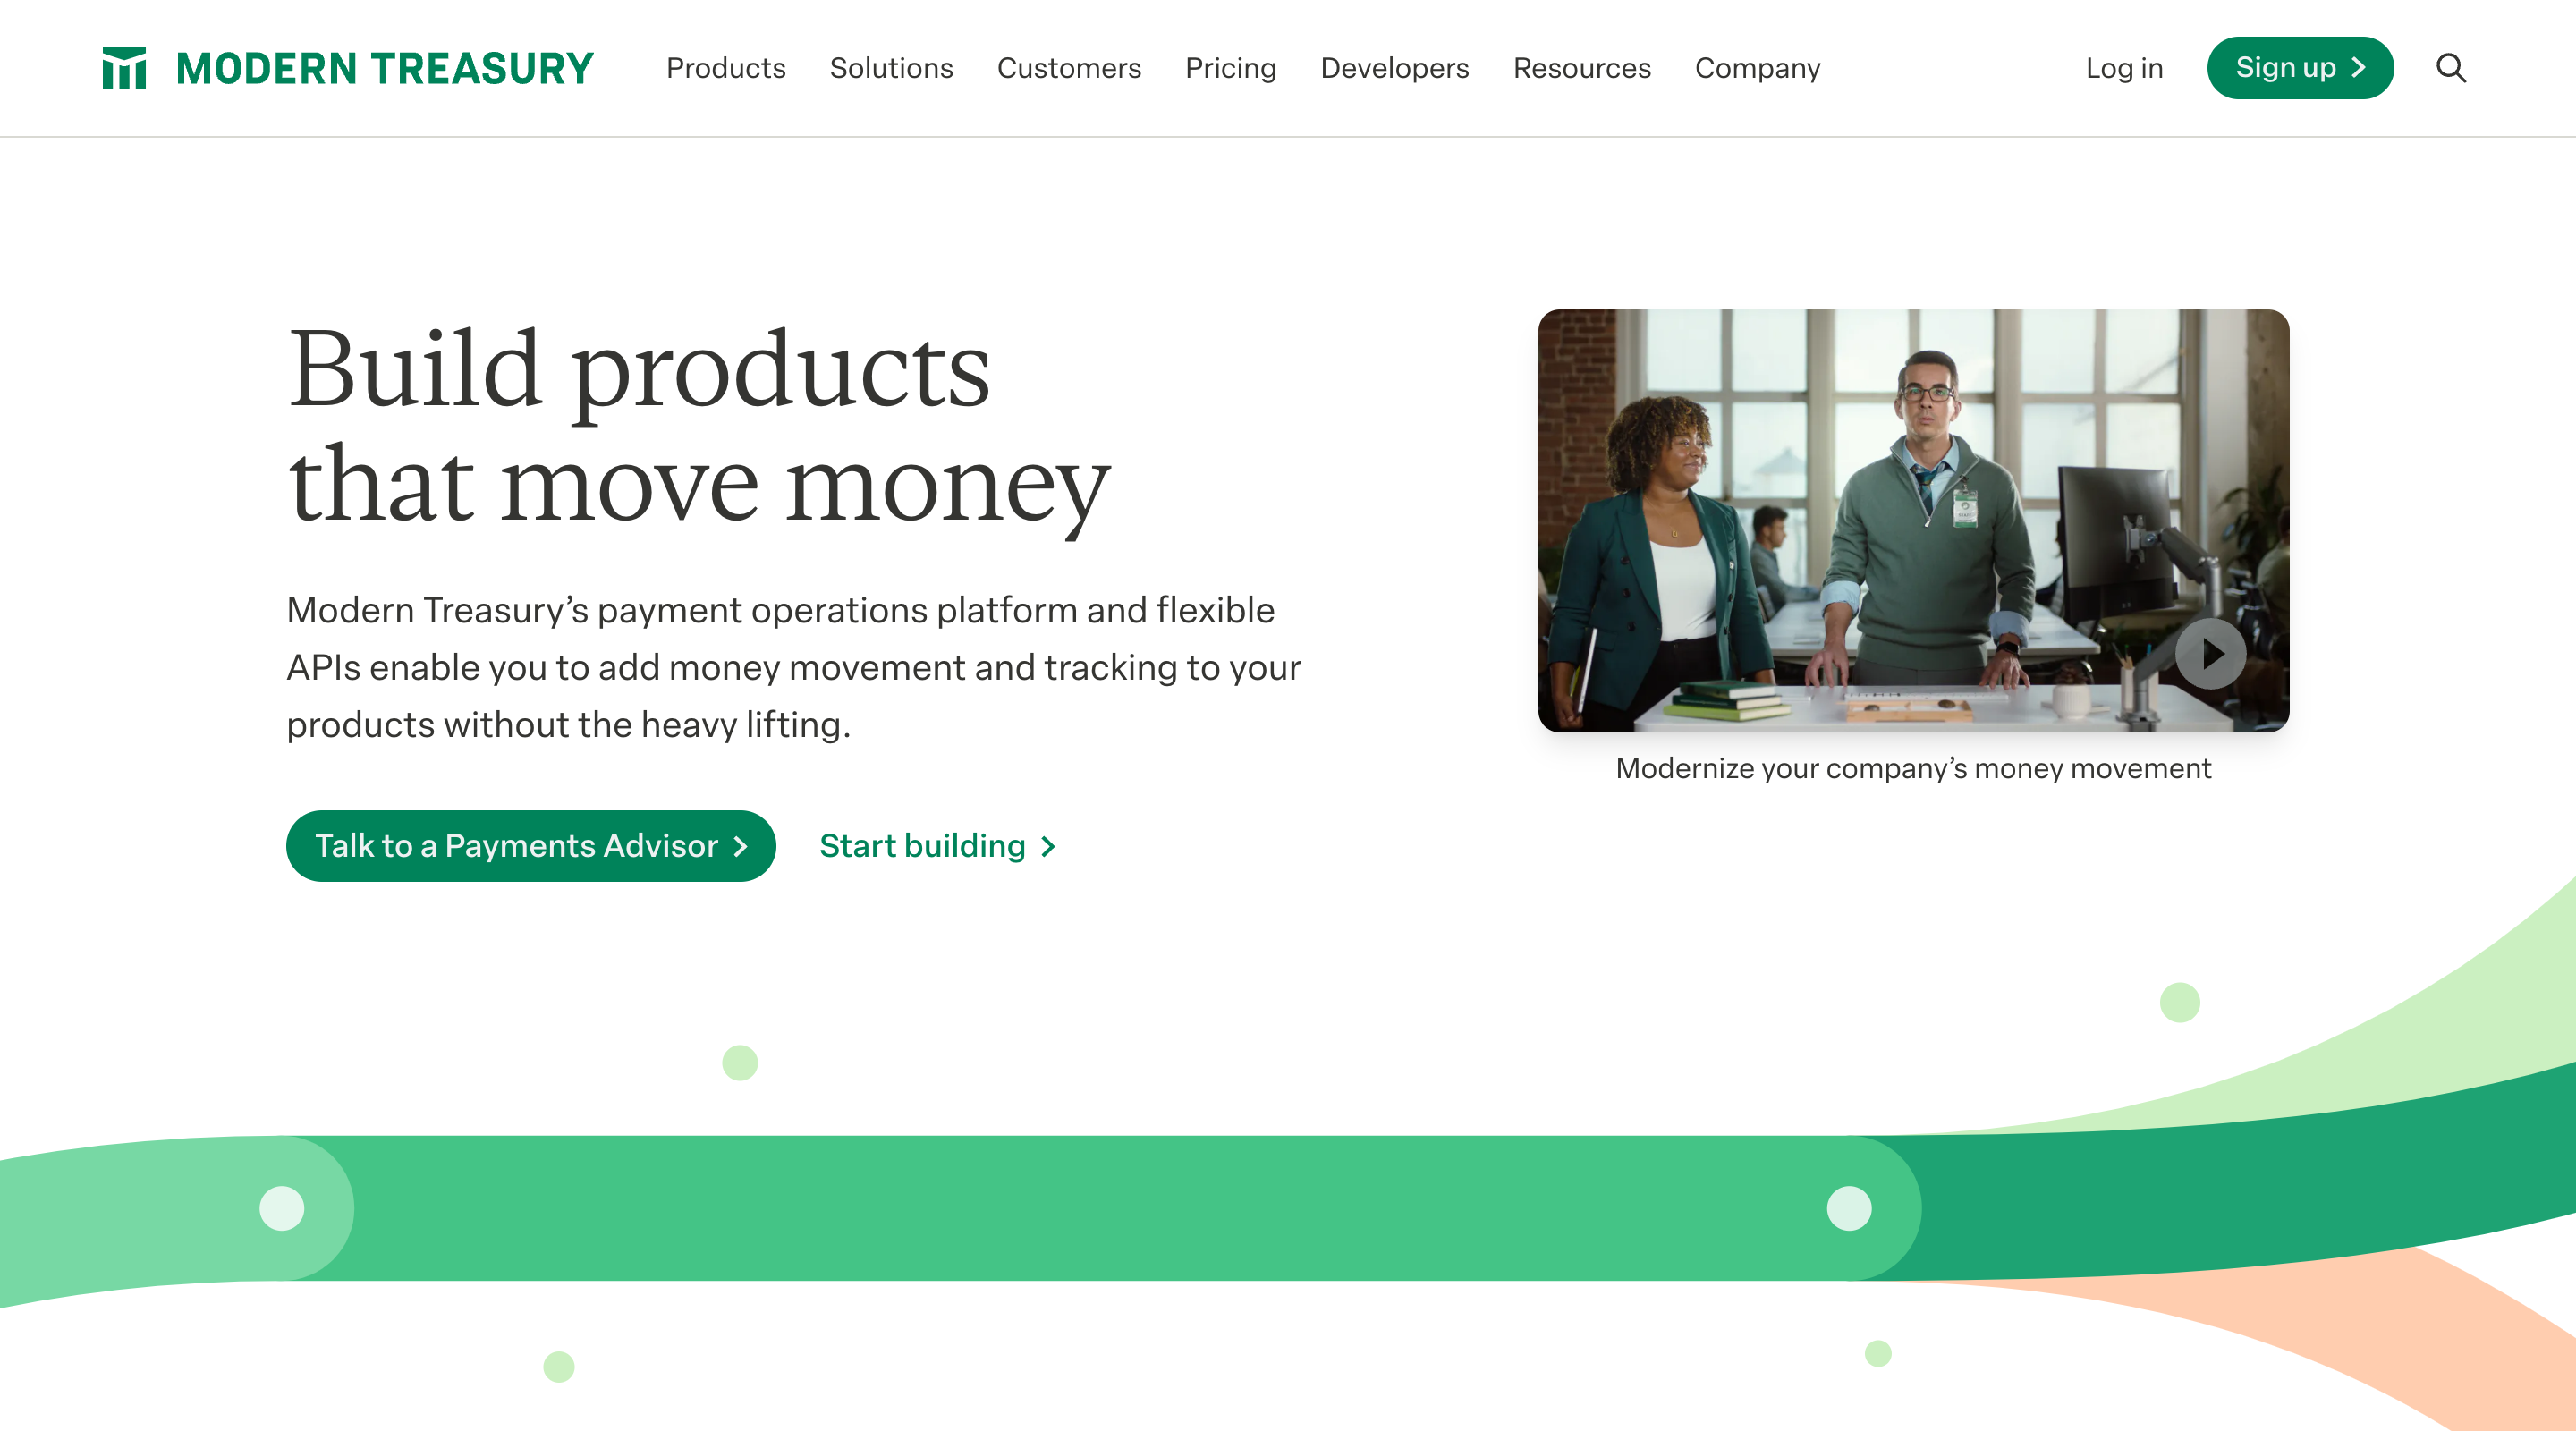 Screenshot of the Modern Treasury home page. The header contains the Modern Treasury logo, main site navigation,'log in' and 'sign up' buttons, and a search button. The hero section contains an intro paragraph and buttons inviting the user to 'Talk to a Payments Advisor' or 'Start building'.